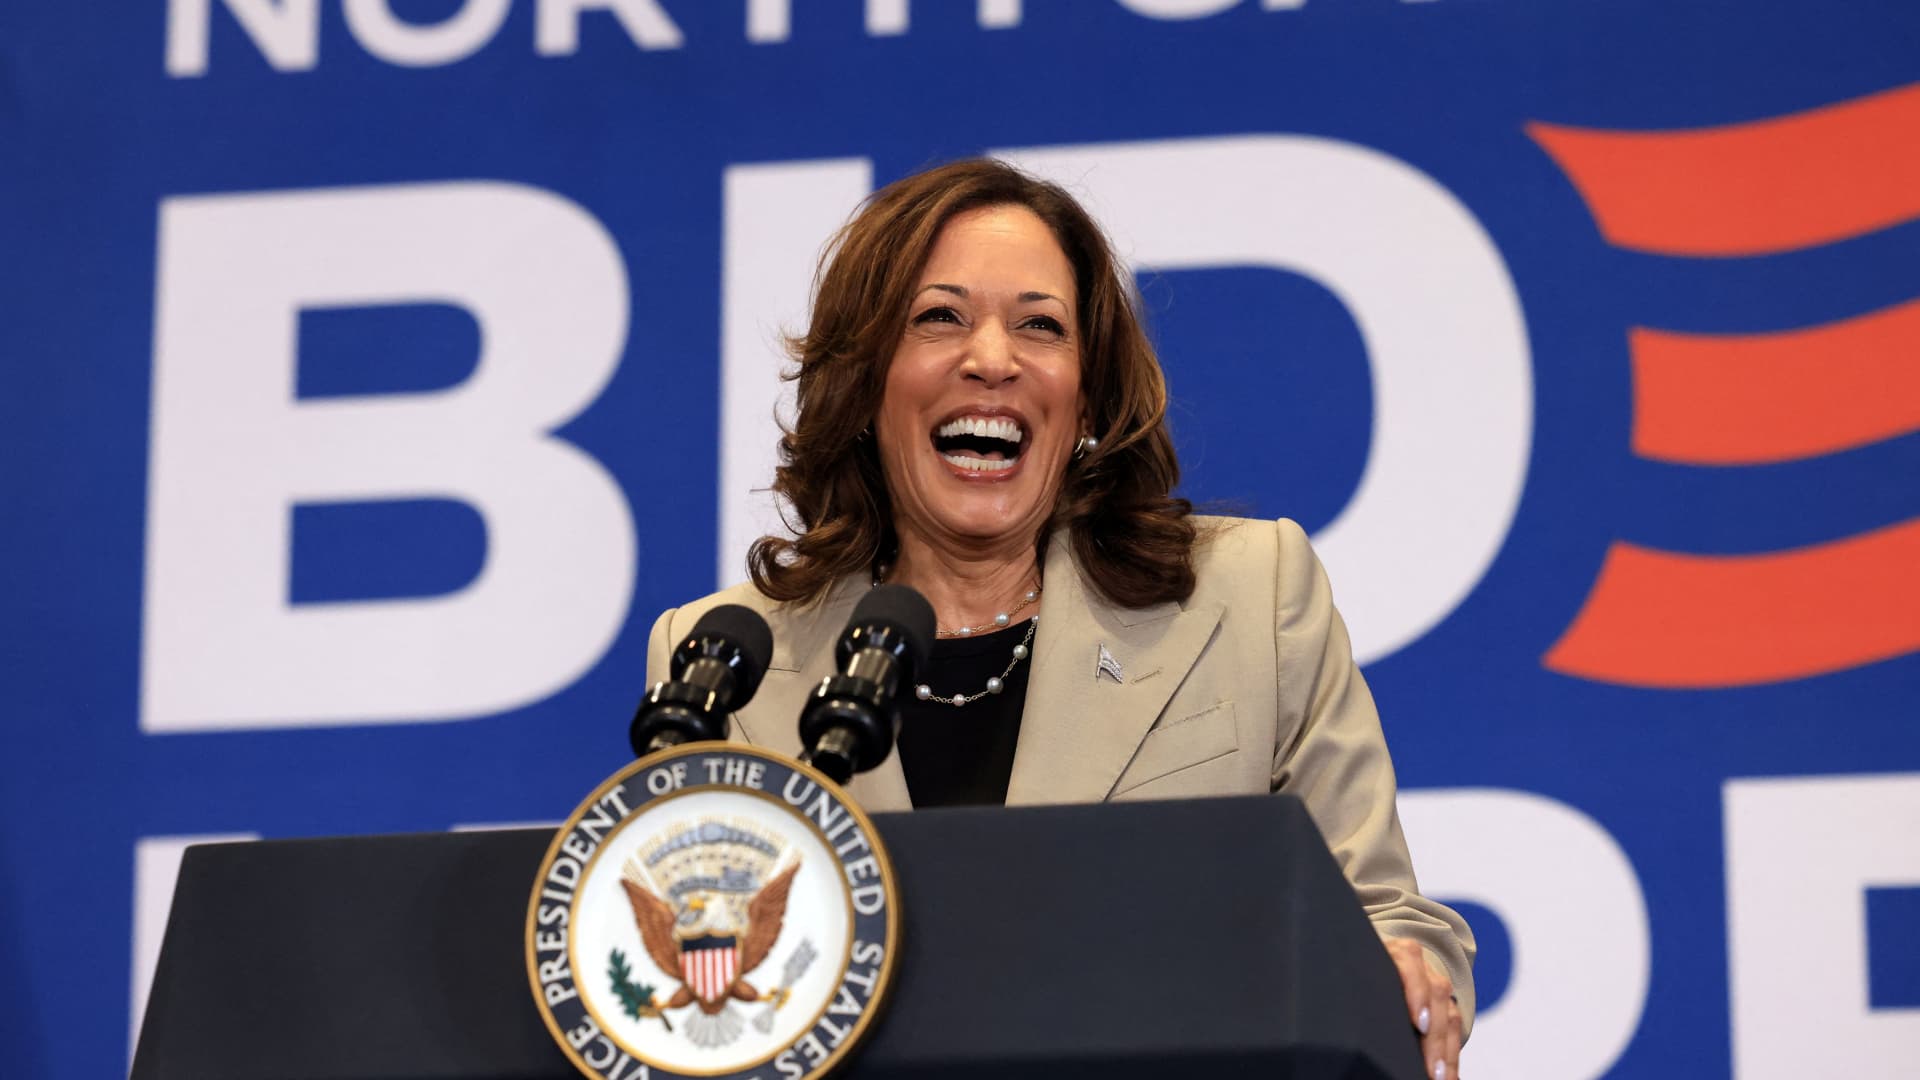 Spotlight on Harris while Biden faces pressure to drop out